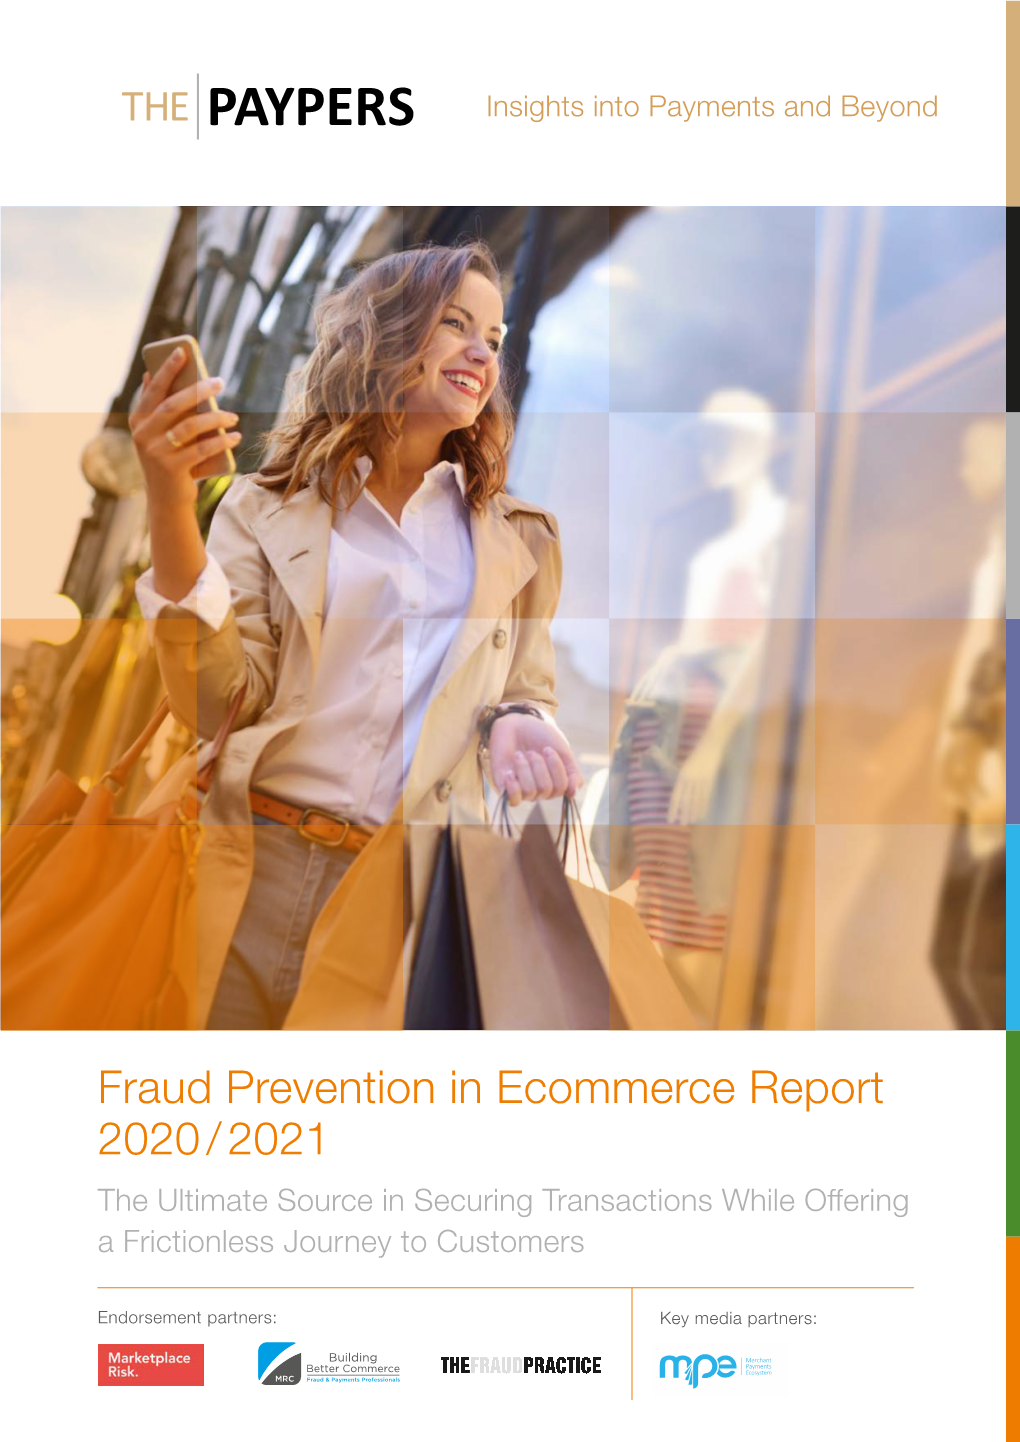 Fraud Prevention in Ecommerce Report 2020 / 2021 the Ultimate Source in Securing Transactions While Offering a Frictionless Journey to Customers